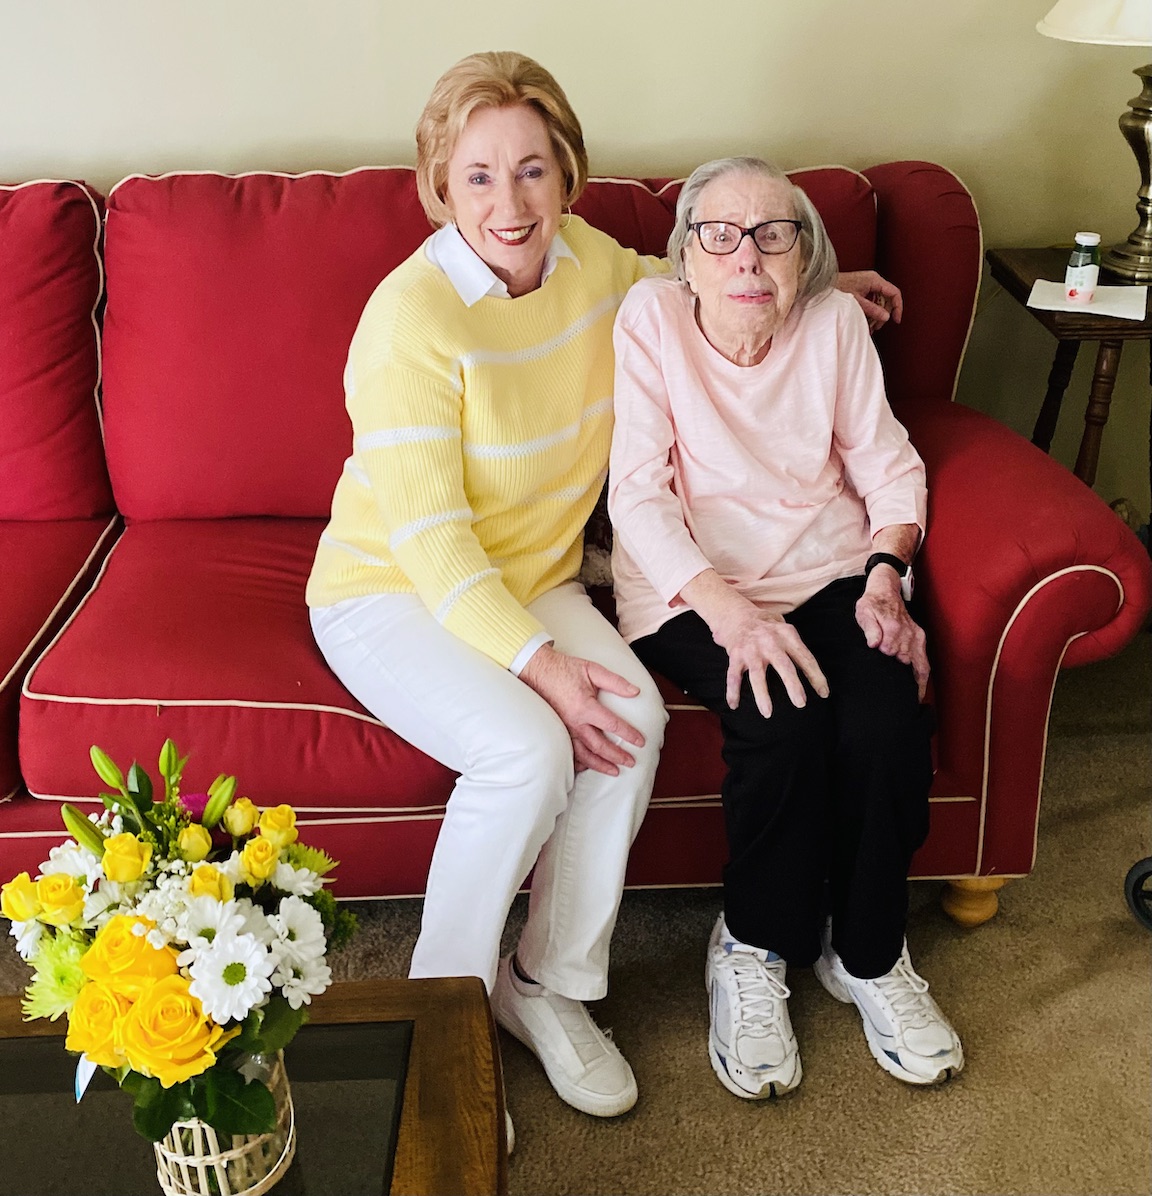 Village of Lewiston Mayor Anne Welch and former Mayor Marilyn Toohey visit at Mrs. Toohey's home on Wednesday.